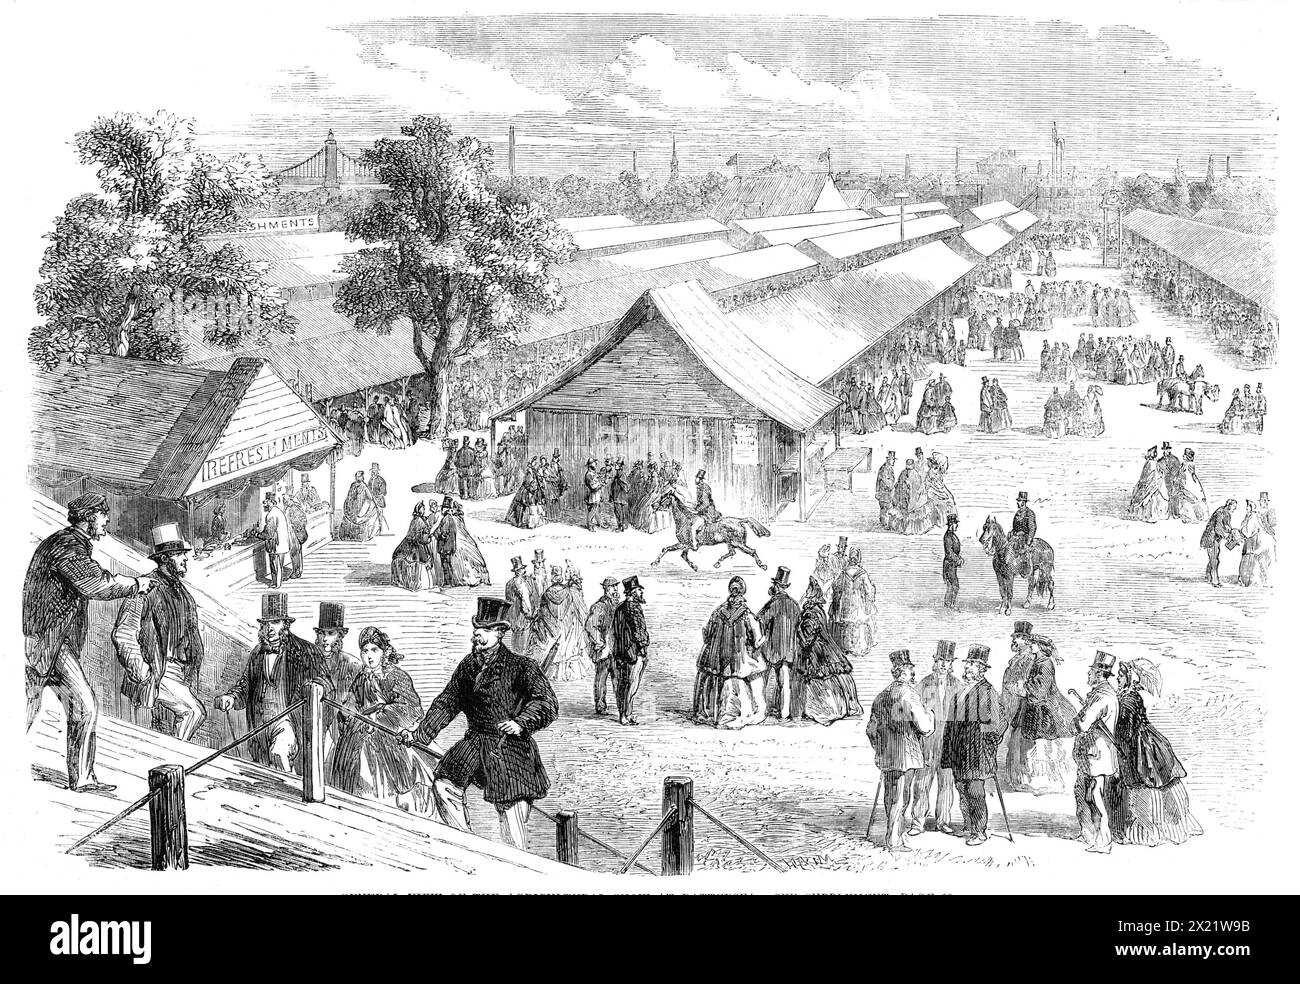 General view of the agricultural show at Battersea, [London], 1862. '...the society has seldom pitched its tent in a nicer spot than the fields of Battersea. A few years ago the place which is now whitened with miles of canvas tents was a mere marsh; whereas the visitor of '62 who takes boat at any of the piers, and faces that somewhat weary journey on Father Thames, is surprised to find himself landed in a bona fide park...with banks and borders planted with shrubs all round them. The whole space occupied by the society includes about 36 acres; and although the cattle men cast a very jealous Stock Photo